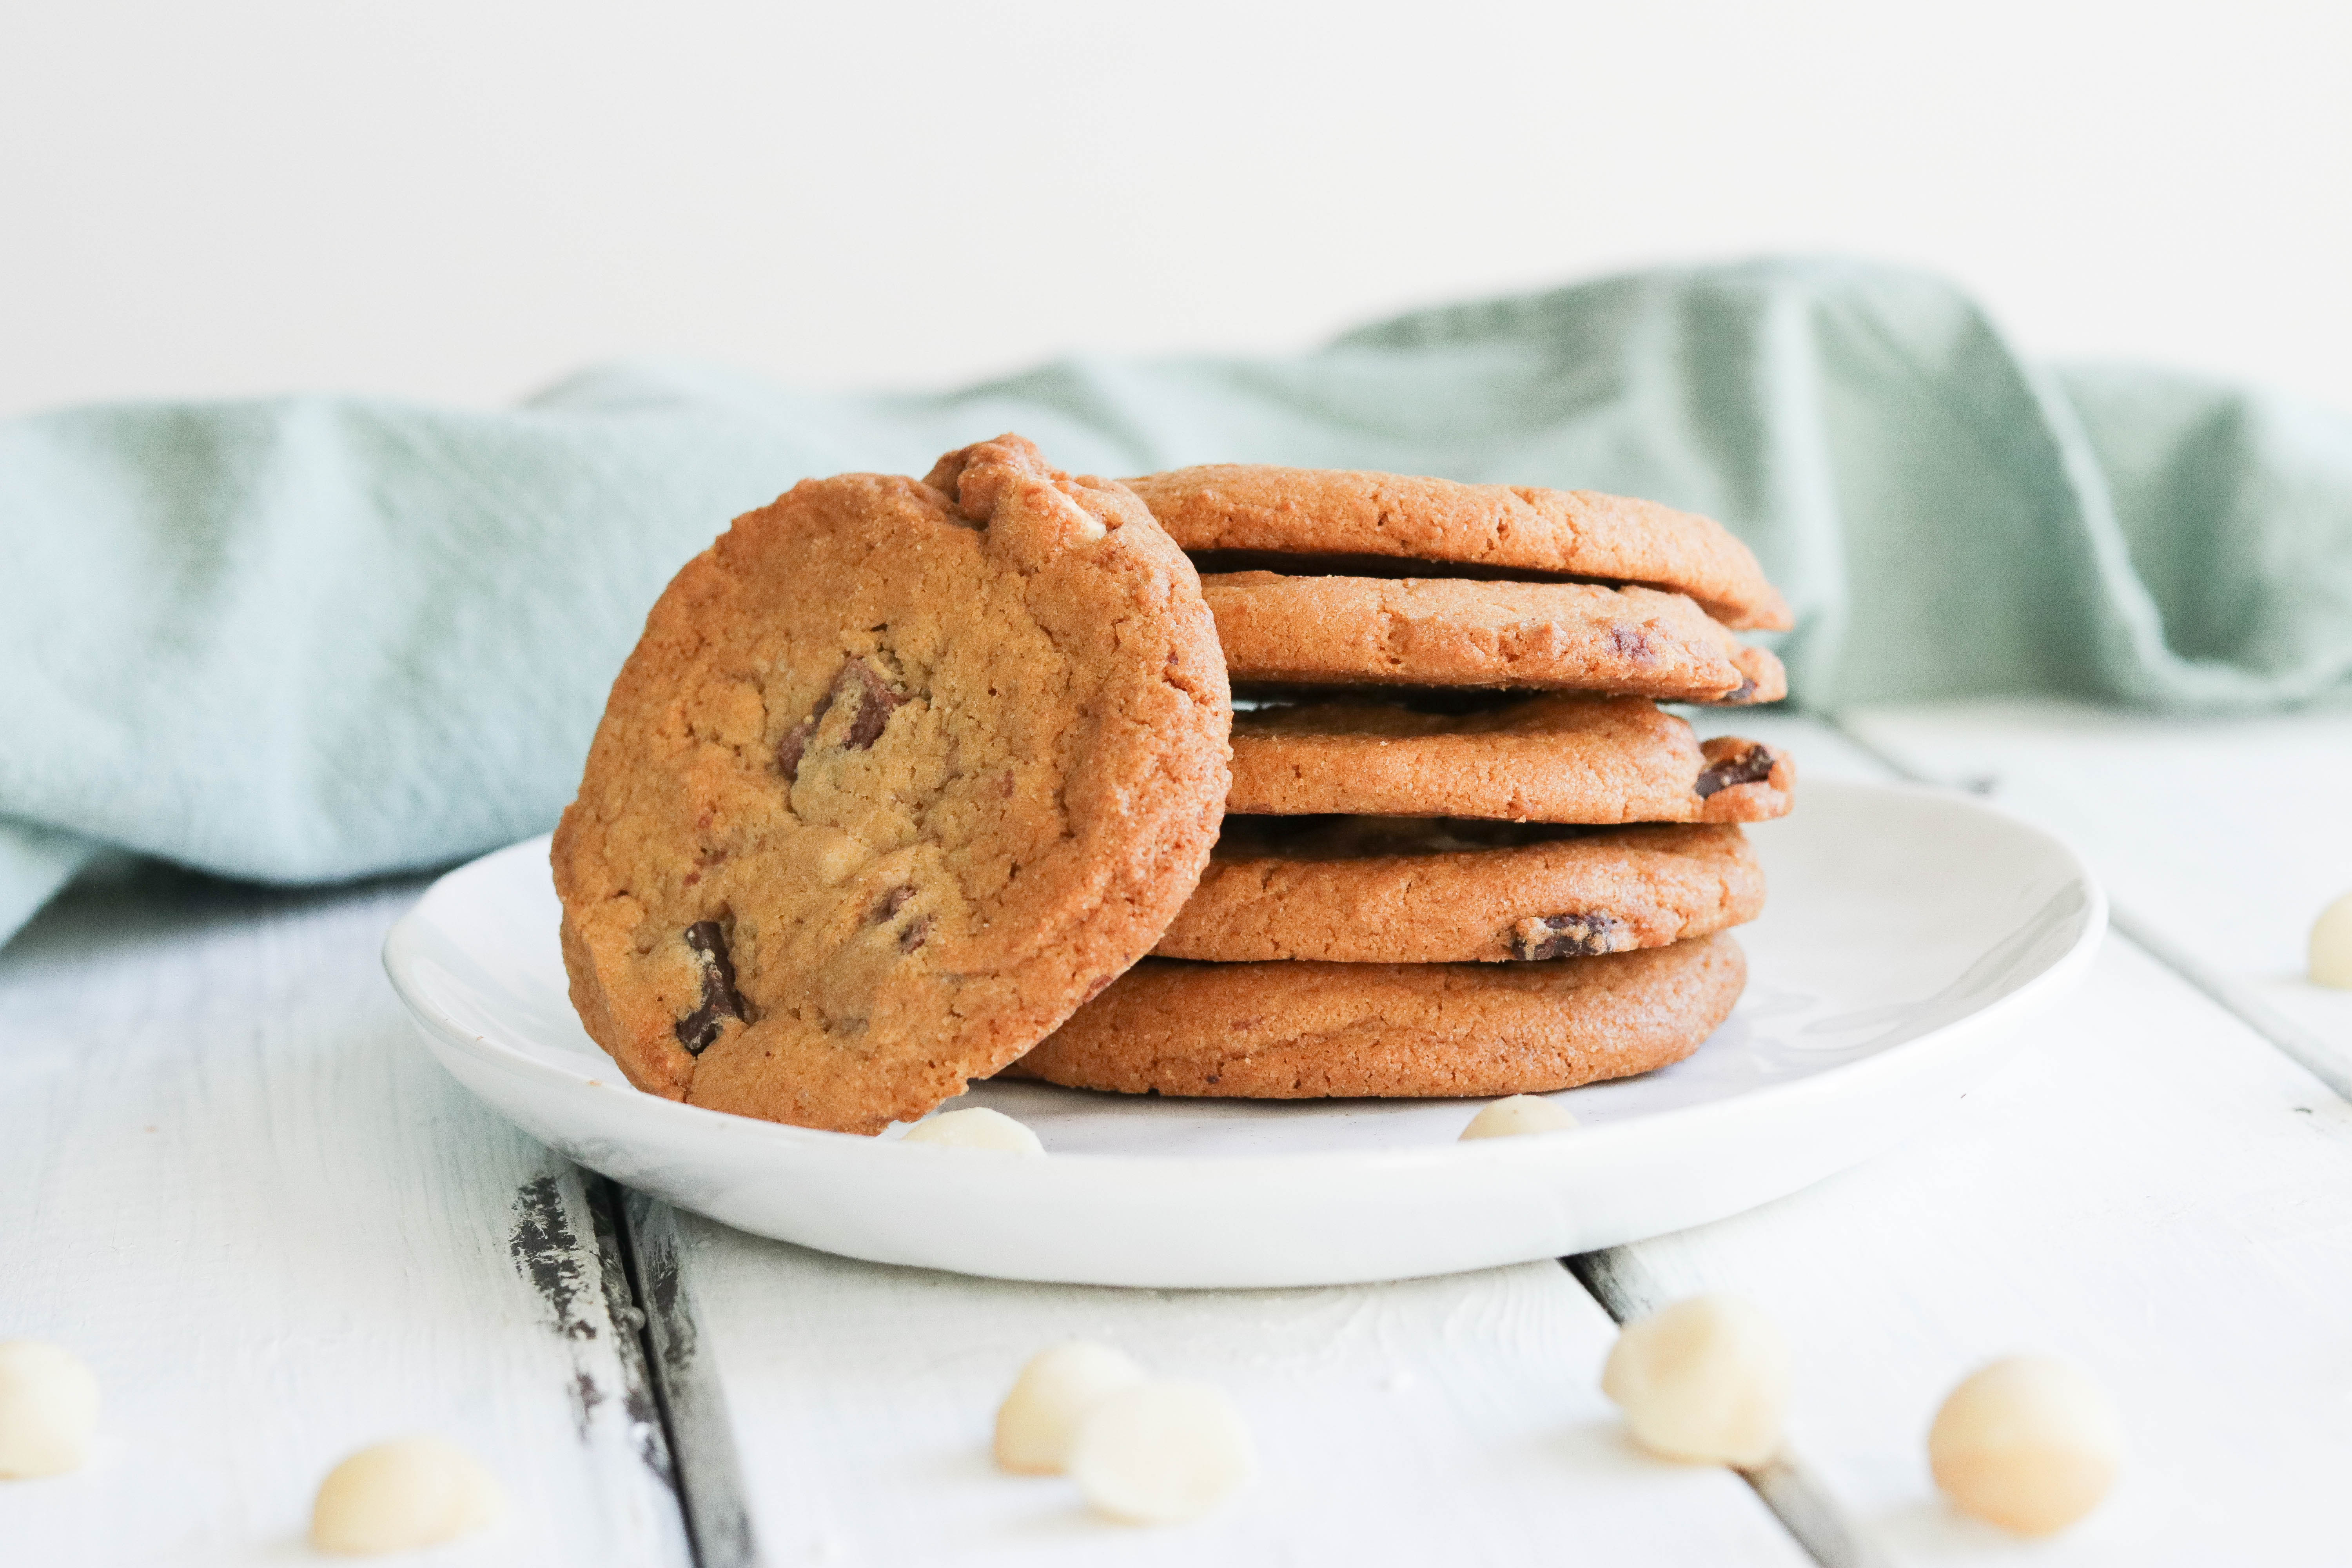 Chocolate Chunk Macadamia Cookie {GF + Vegan}; soft gluten free and vegan cookies. Made with oat flour, coconut oil, chunks of dark chocolate and macadamia nuts. Perfect treat, snack and dessert all in one! #vegan #cookies #glutenfree